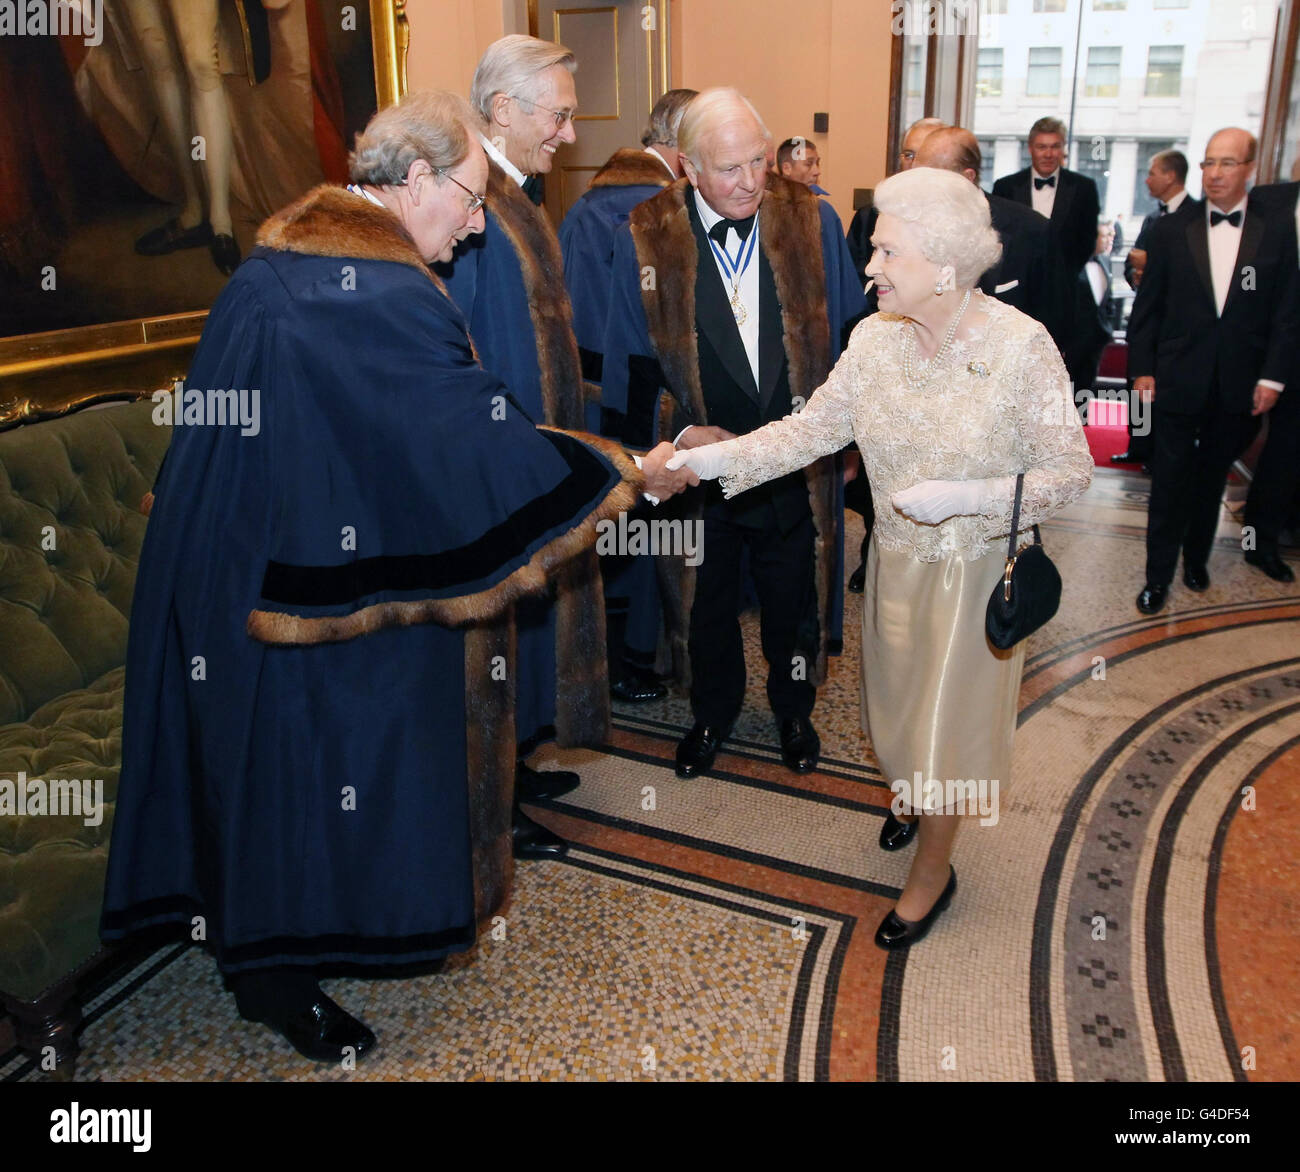 Britain's Queen Elizabeth II is greeted by the Wardens of Worshipful Companies as she arrives at Fishmongers' Hall, London, to attend a reception and dinner for Worshipful Companies, to mark the Duke of Edinburgh's 90th Birthday. Stock Photo